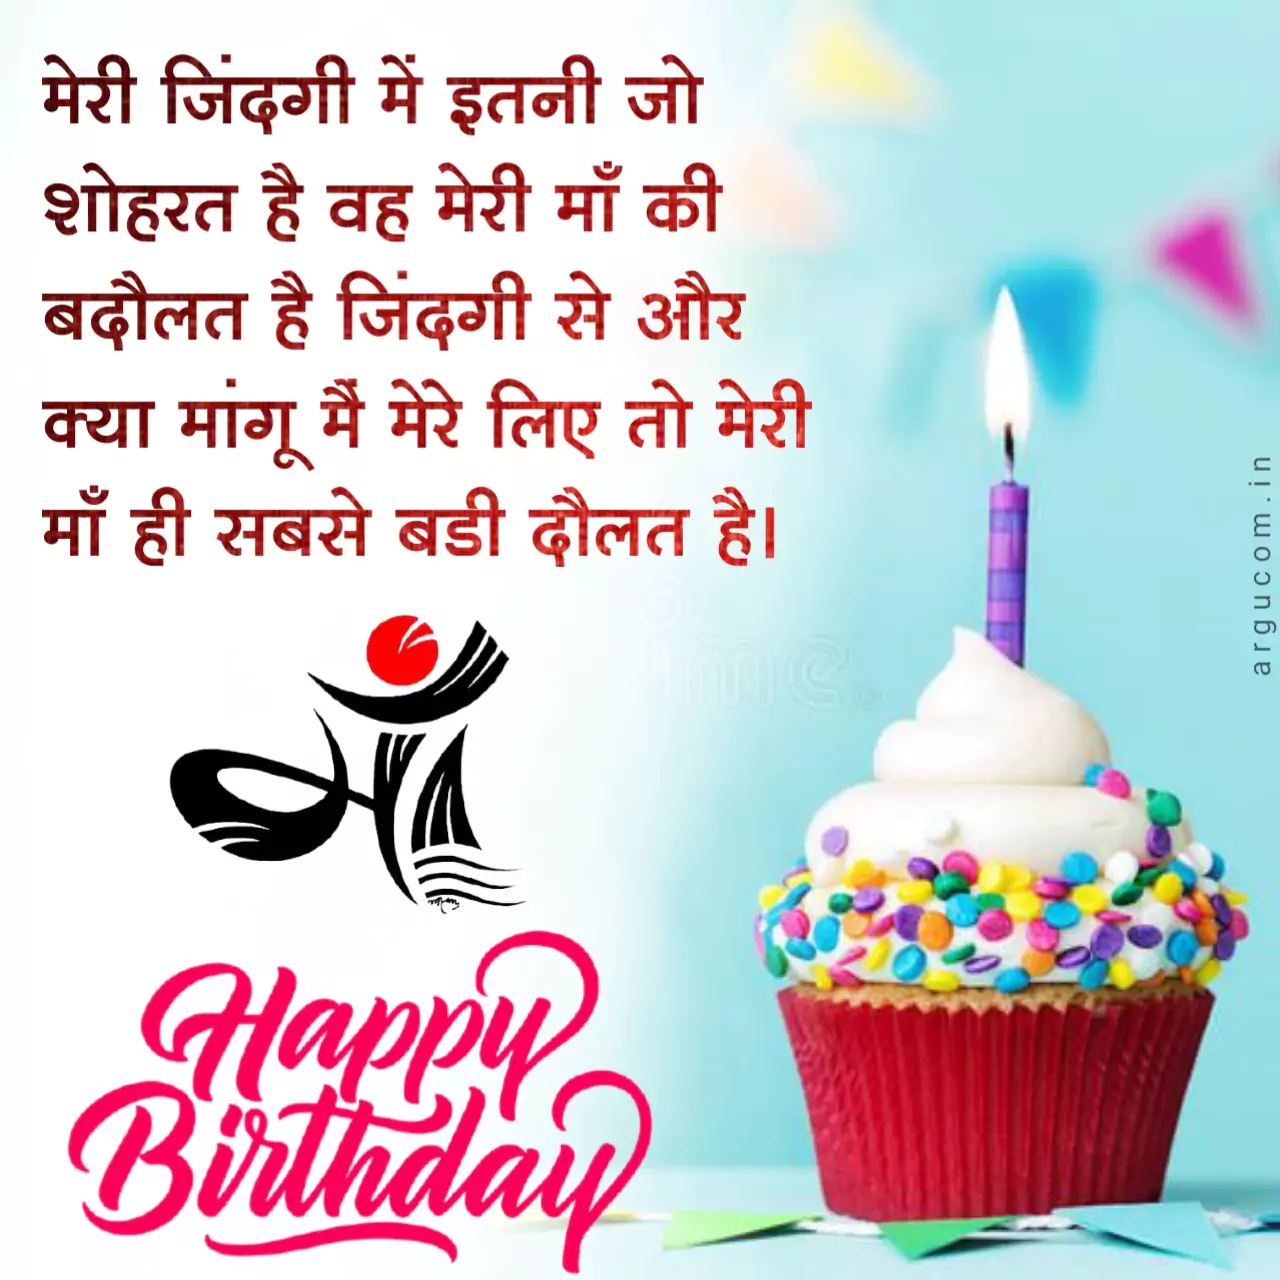 Happy birthday wishes for mother in hindi